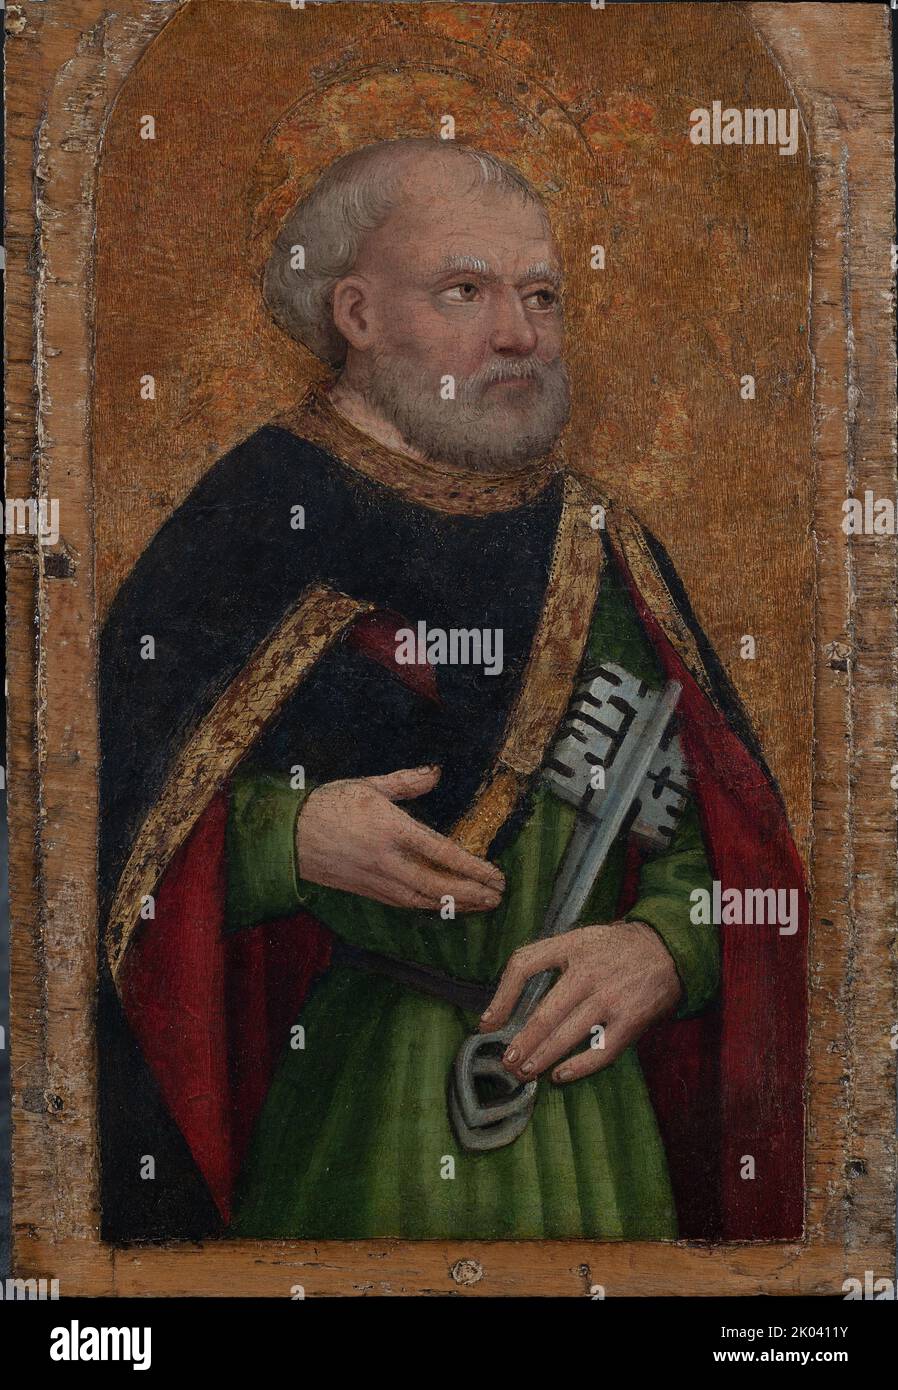 Saint Paul, 1465-1470. Found in the collection of the Museo Civico d'Arte Antica, Turin. Stock Photo